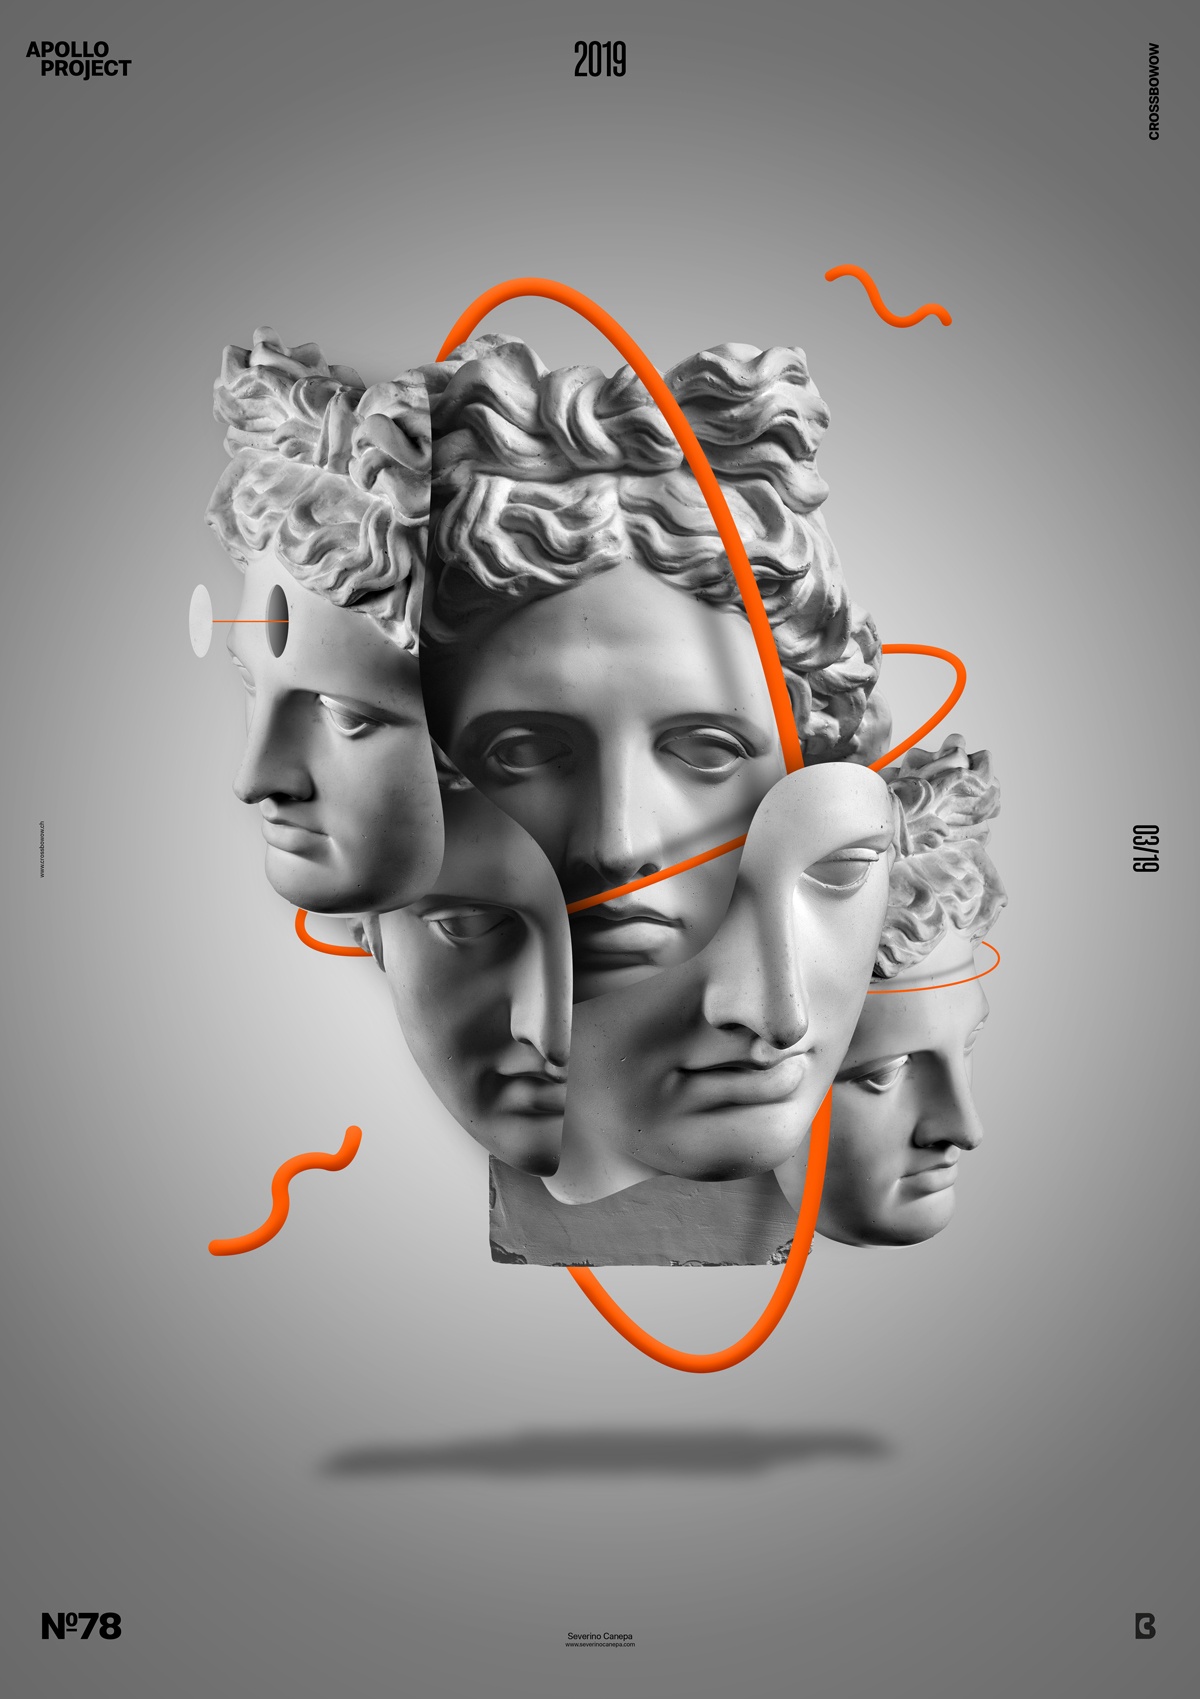 Visual of the creative poster design #78 Drop The Mask made of some parts of Apollo's head